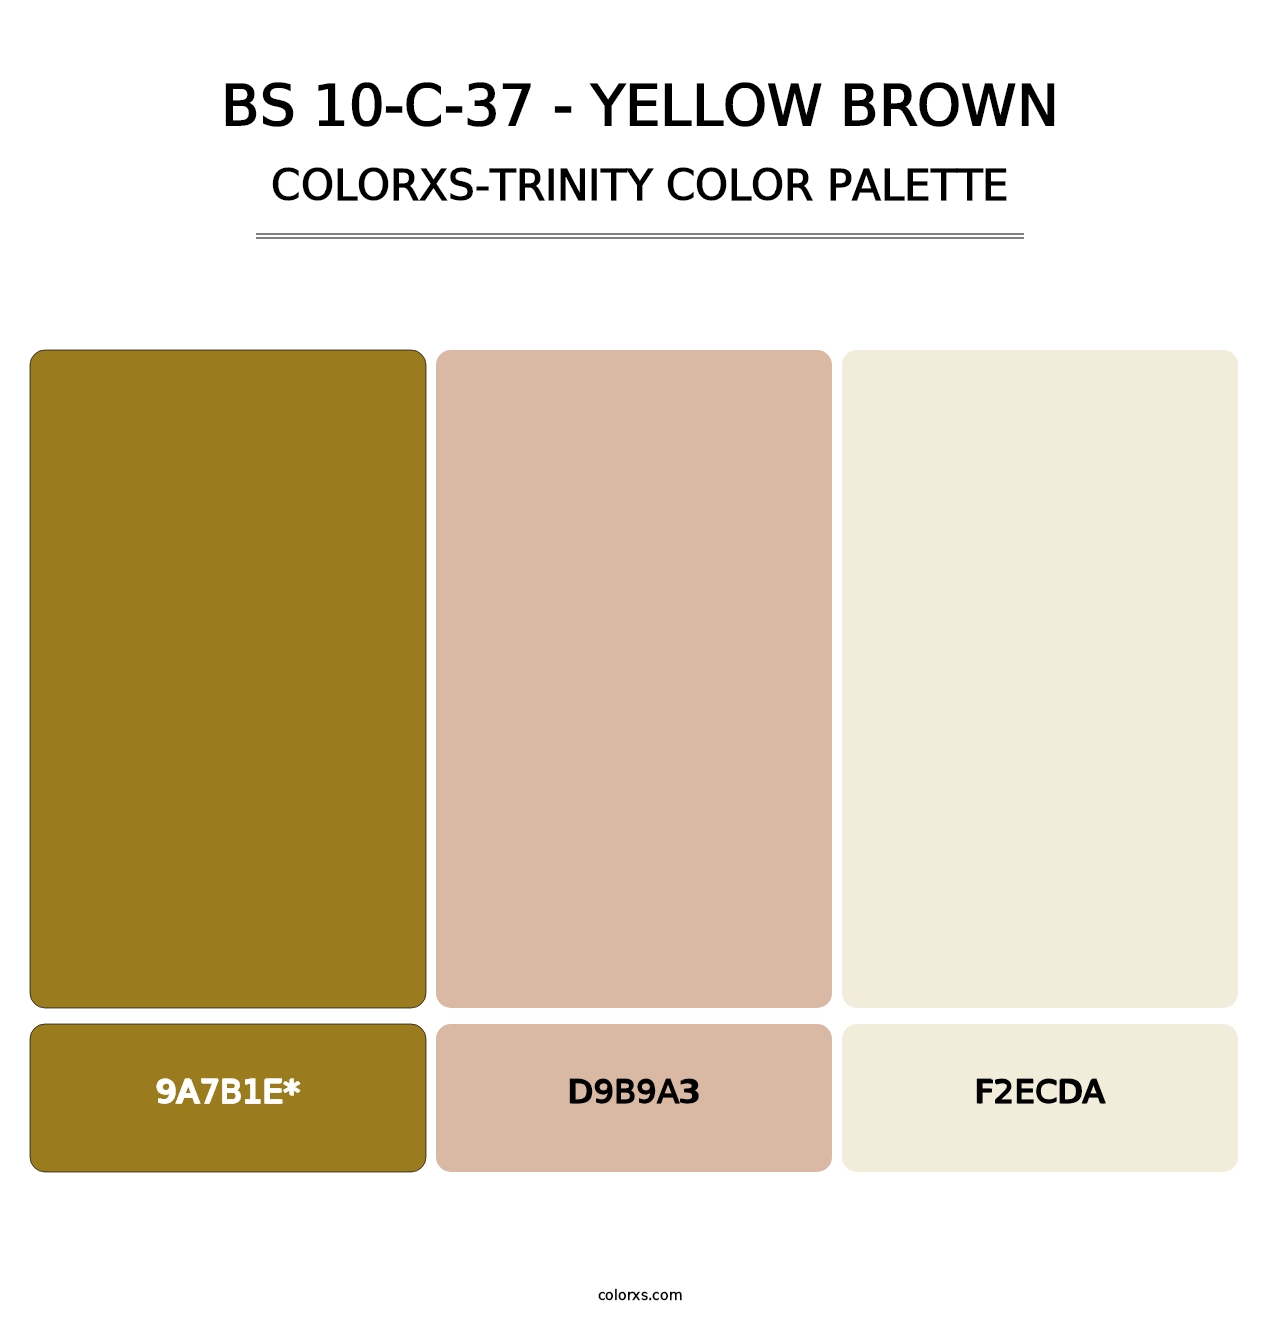 BS 10-C-37 - Yellow Brown - Colorxs Trinity Palette